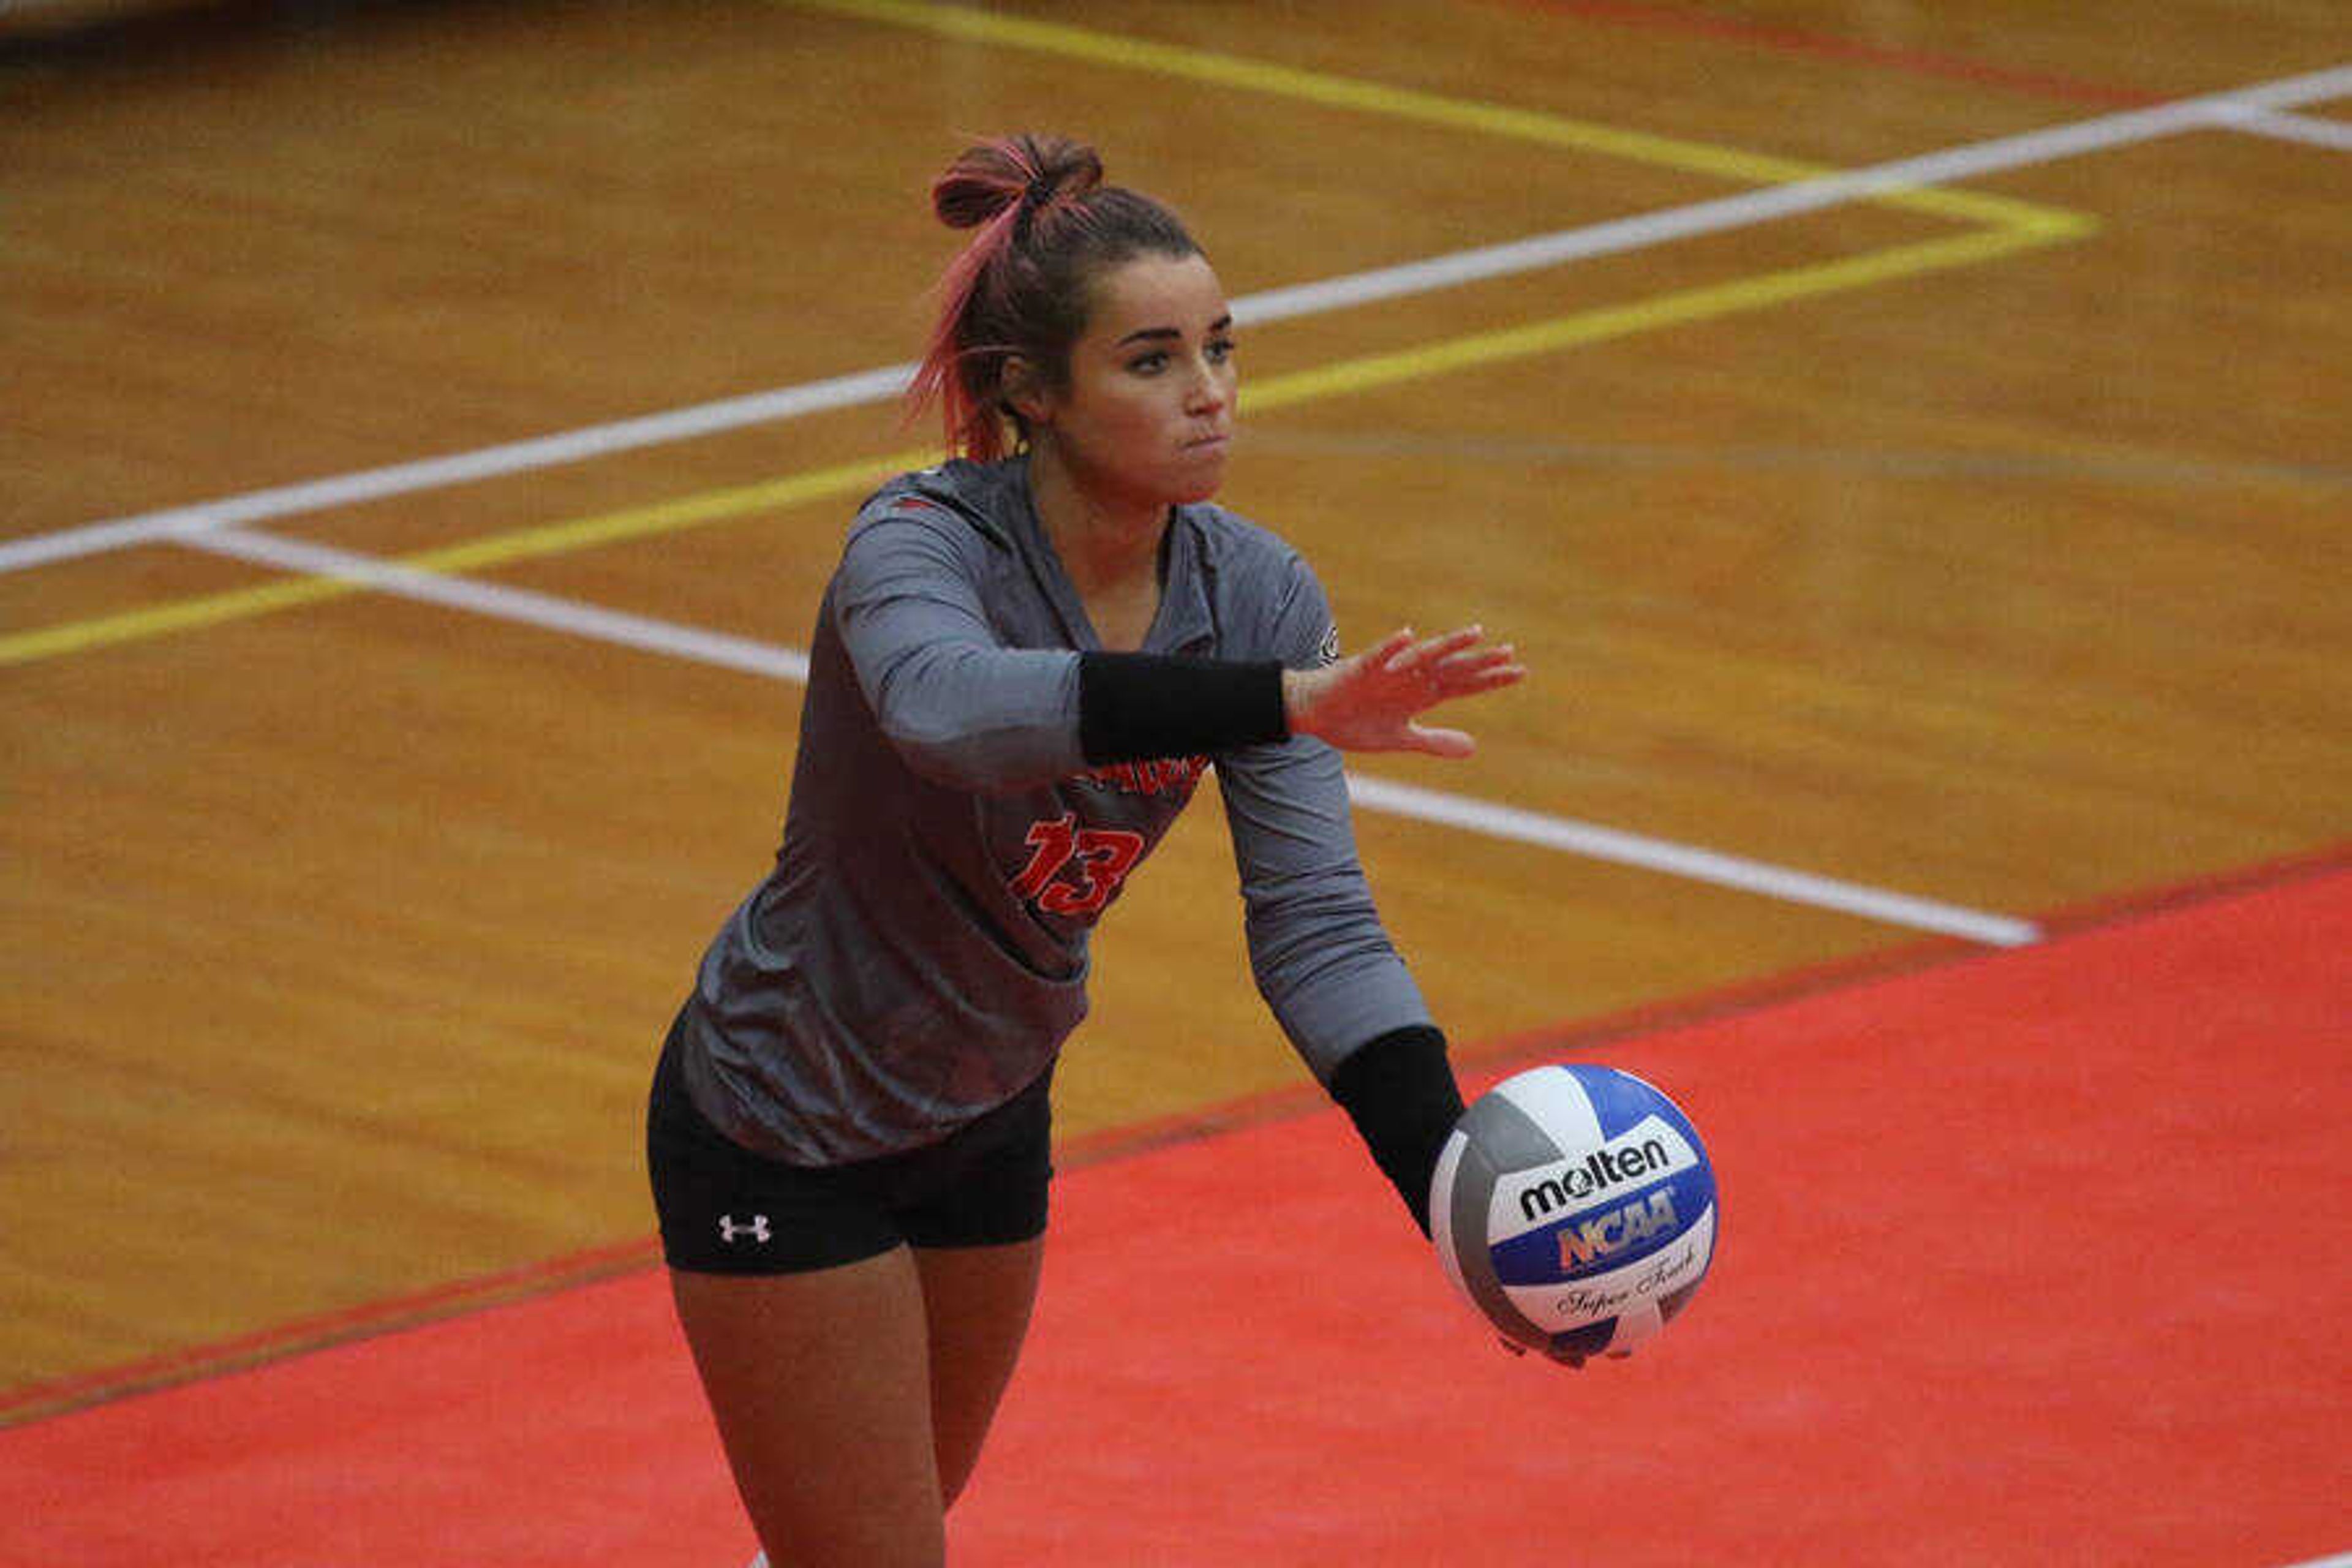 Emily Boggetto prepares to serve at a home match in the midst of the 23-11 campaign in 2019.